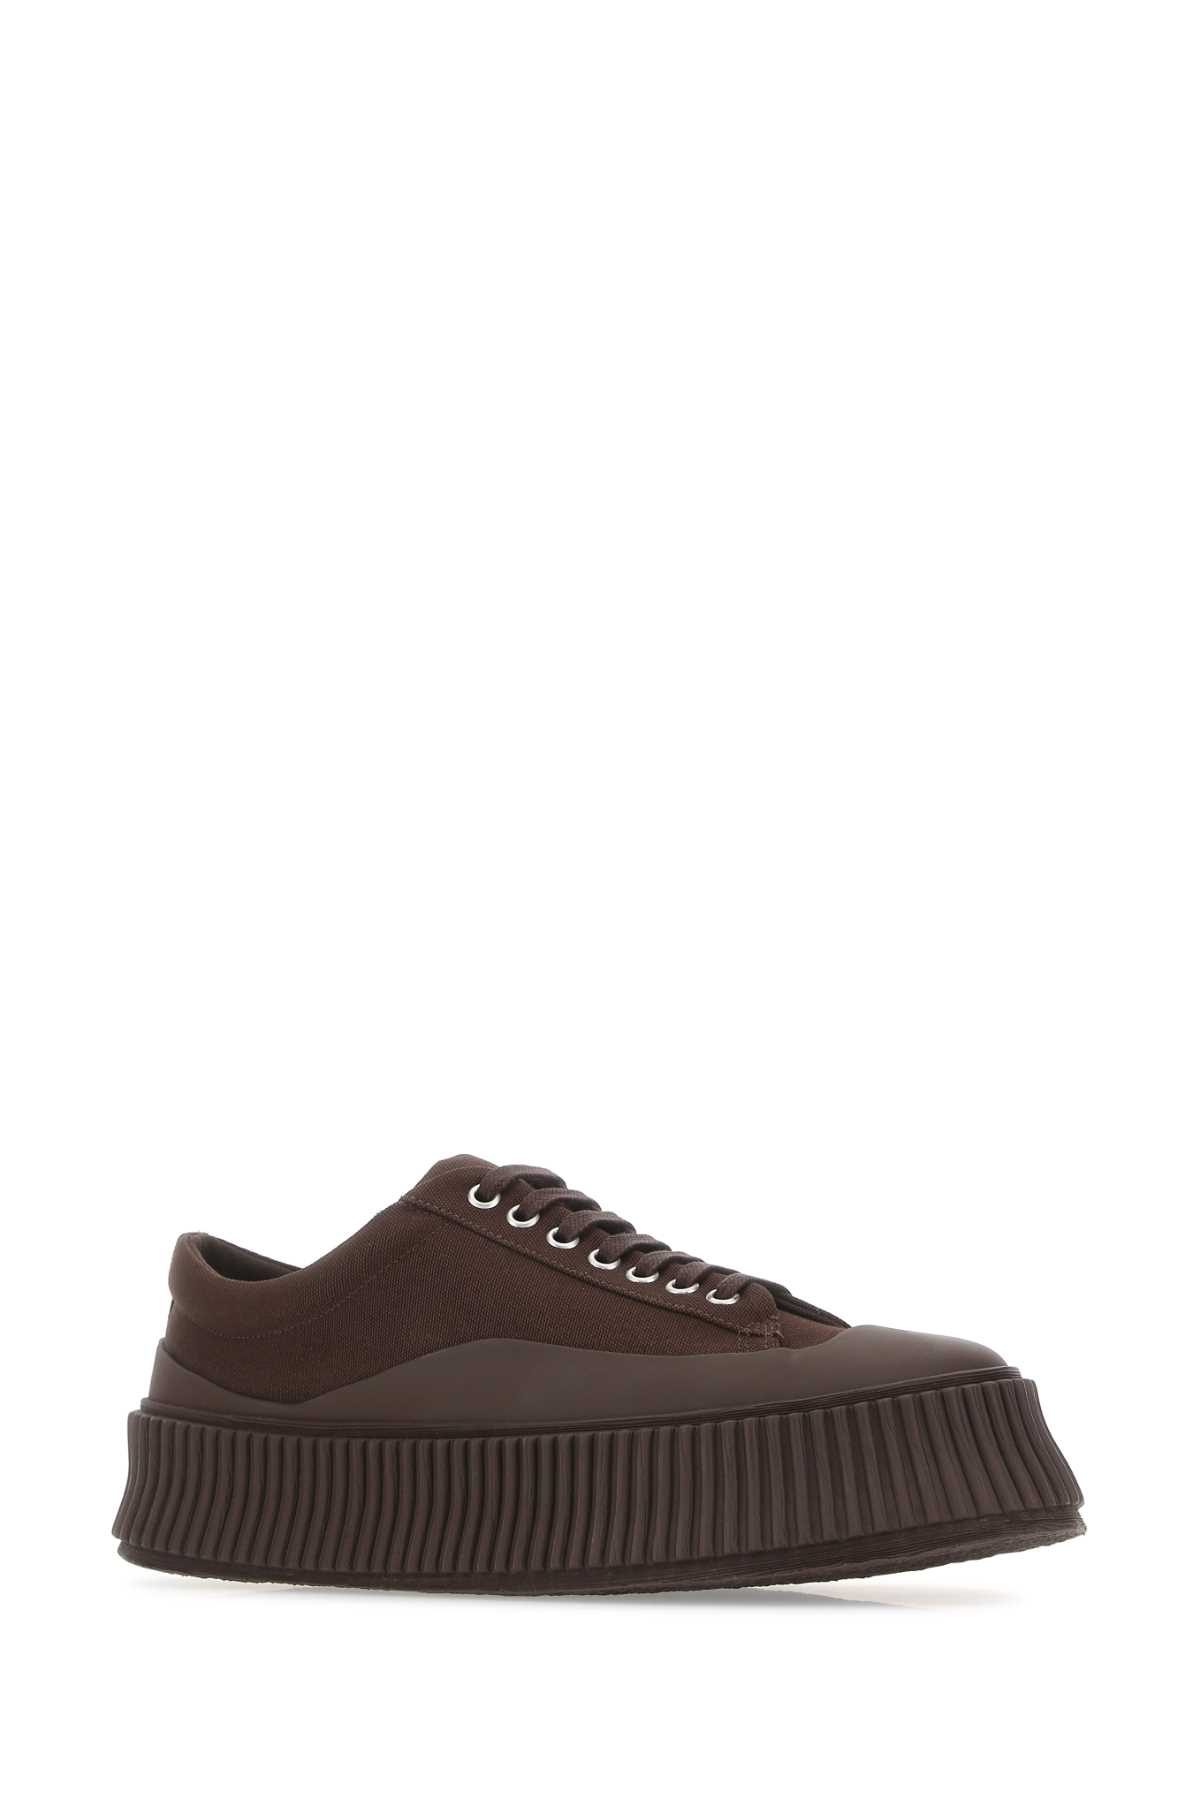 Jil Sander Brown Canvas And Rubber Sneakers In 209